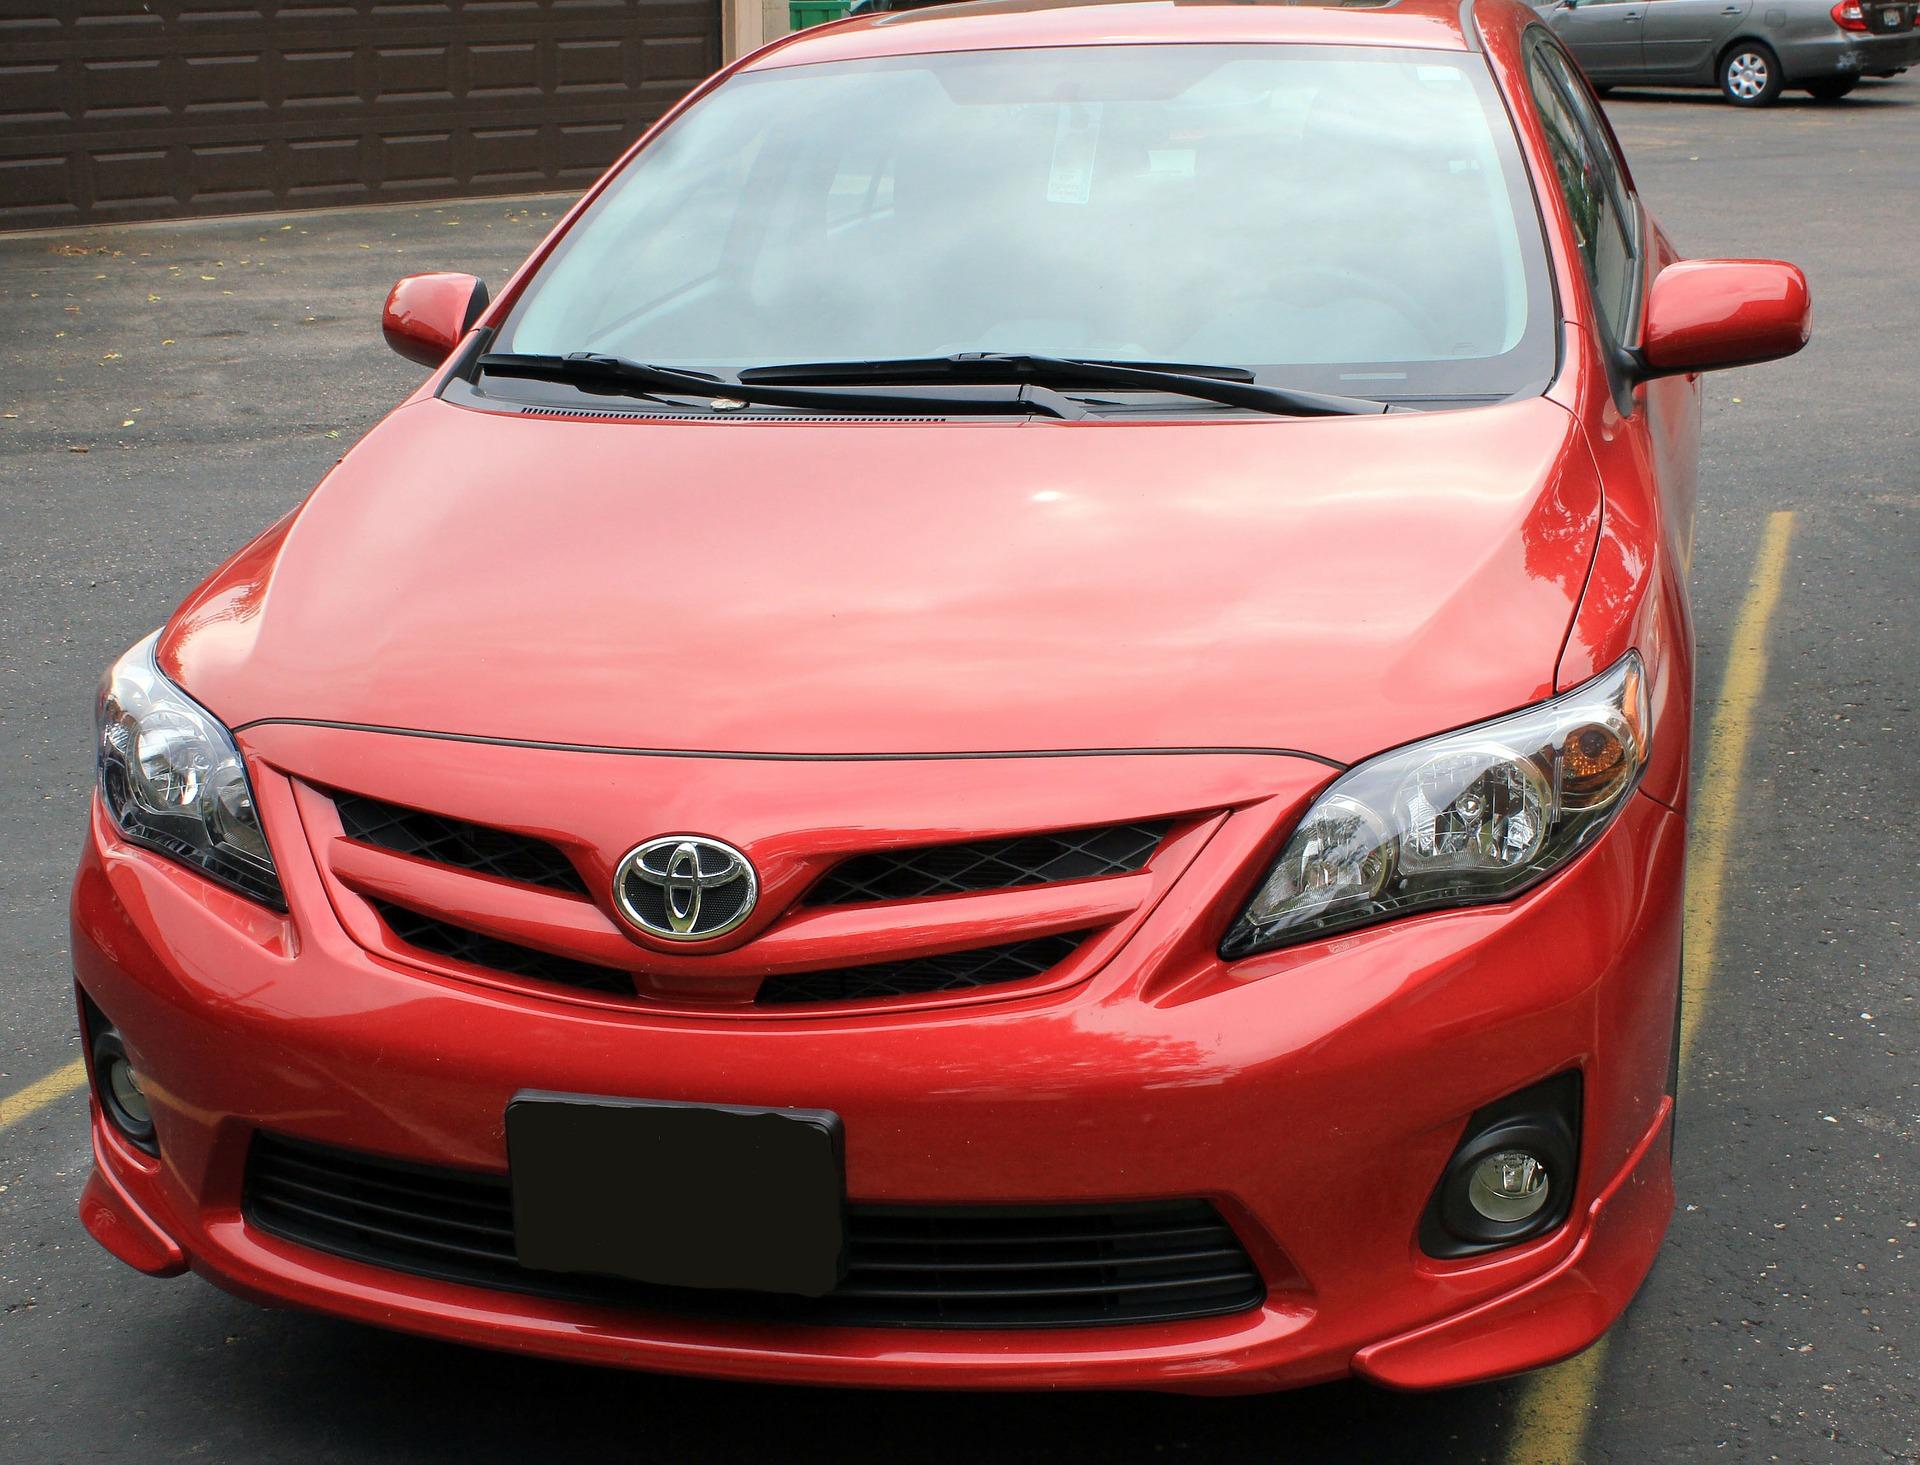 The Toyota Corolla offers a better asking price and fuel mileage than the RAV4, but fewer features.